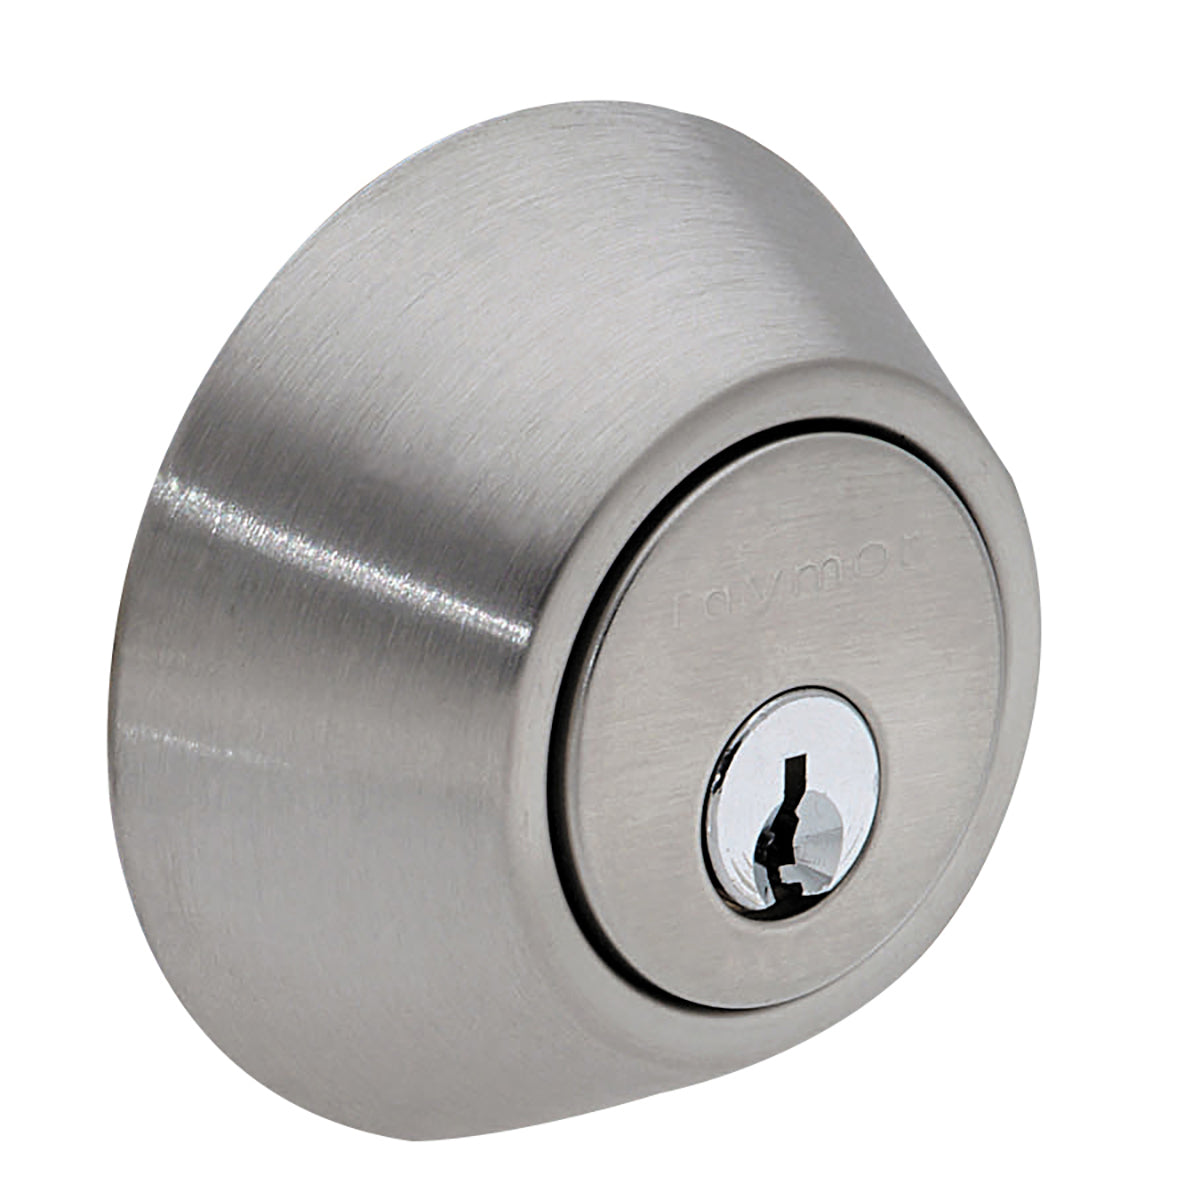 Professional Series Traditional Deadbolt, Satin Stainless Steel